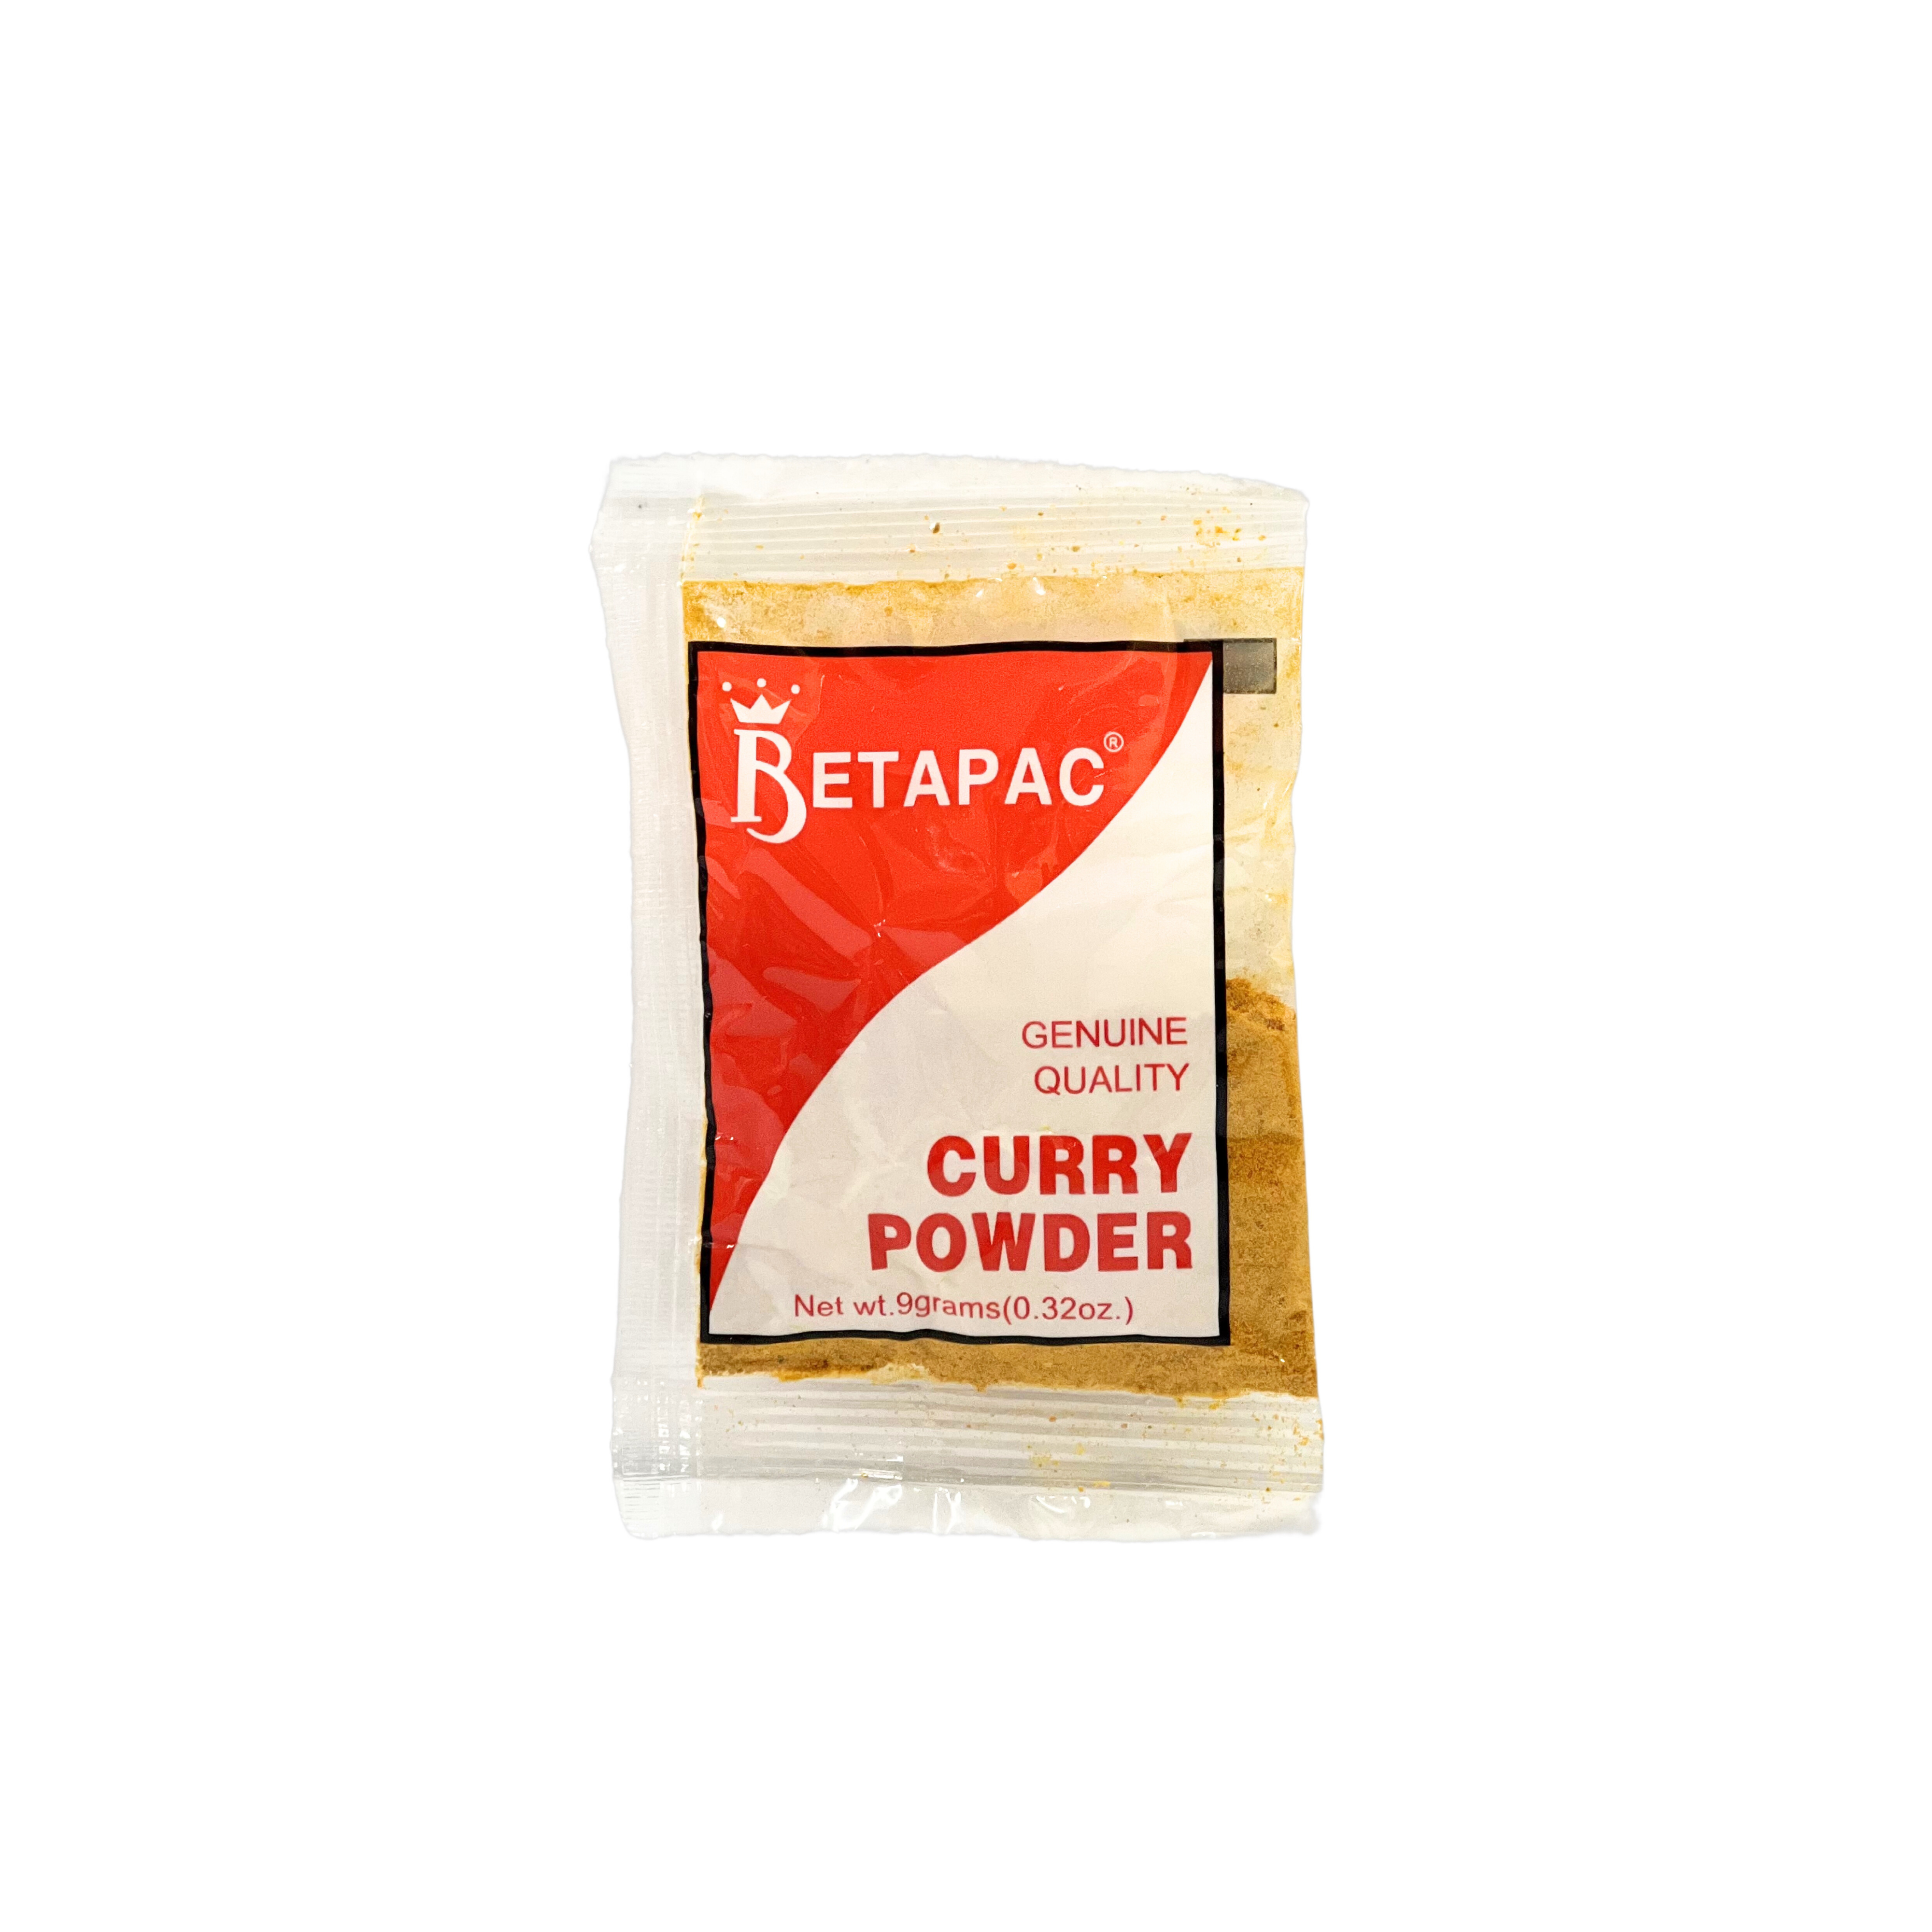 Betapak Curry Powder Pouch 9g